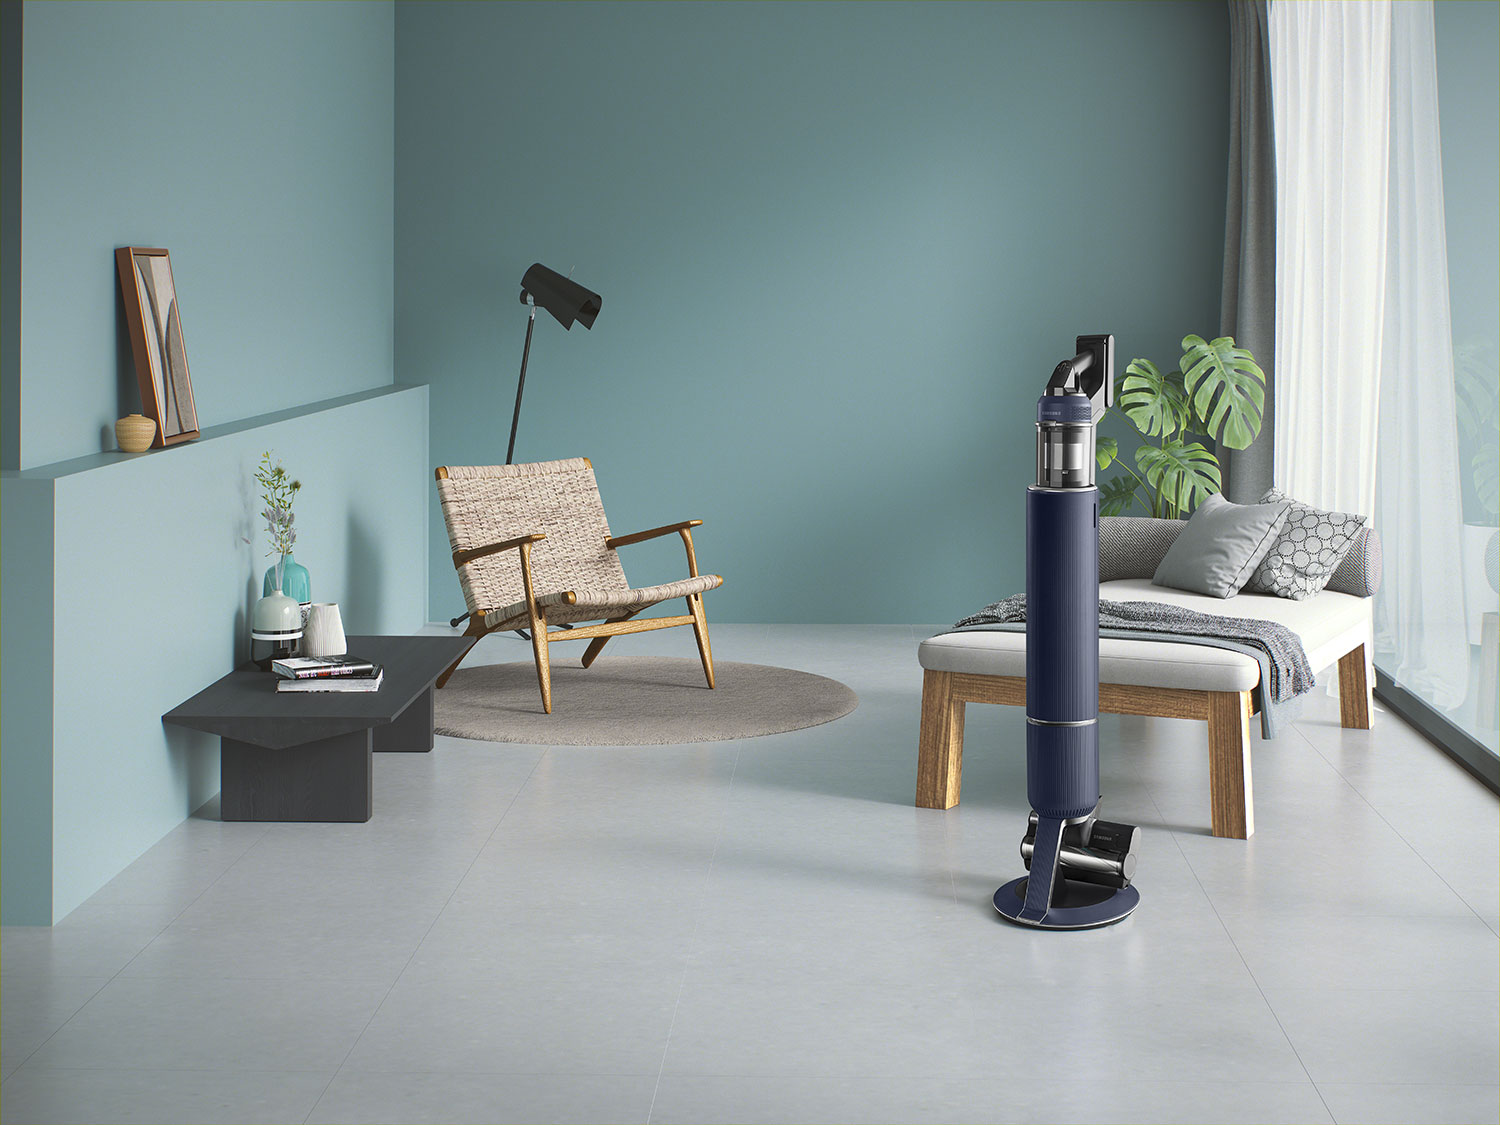 At home with Samsung Bespoke Jet Stick Vacuum Cleaner